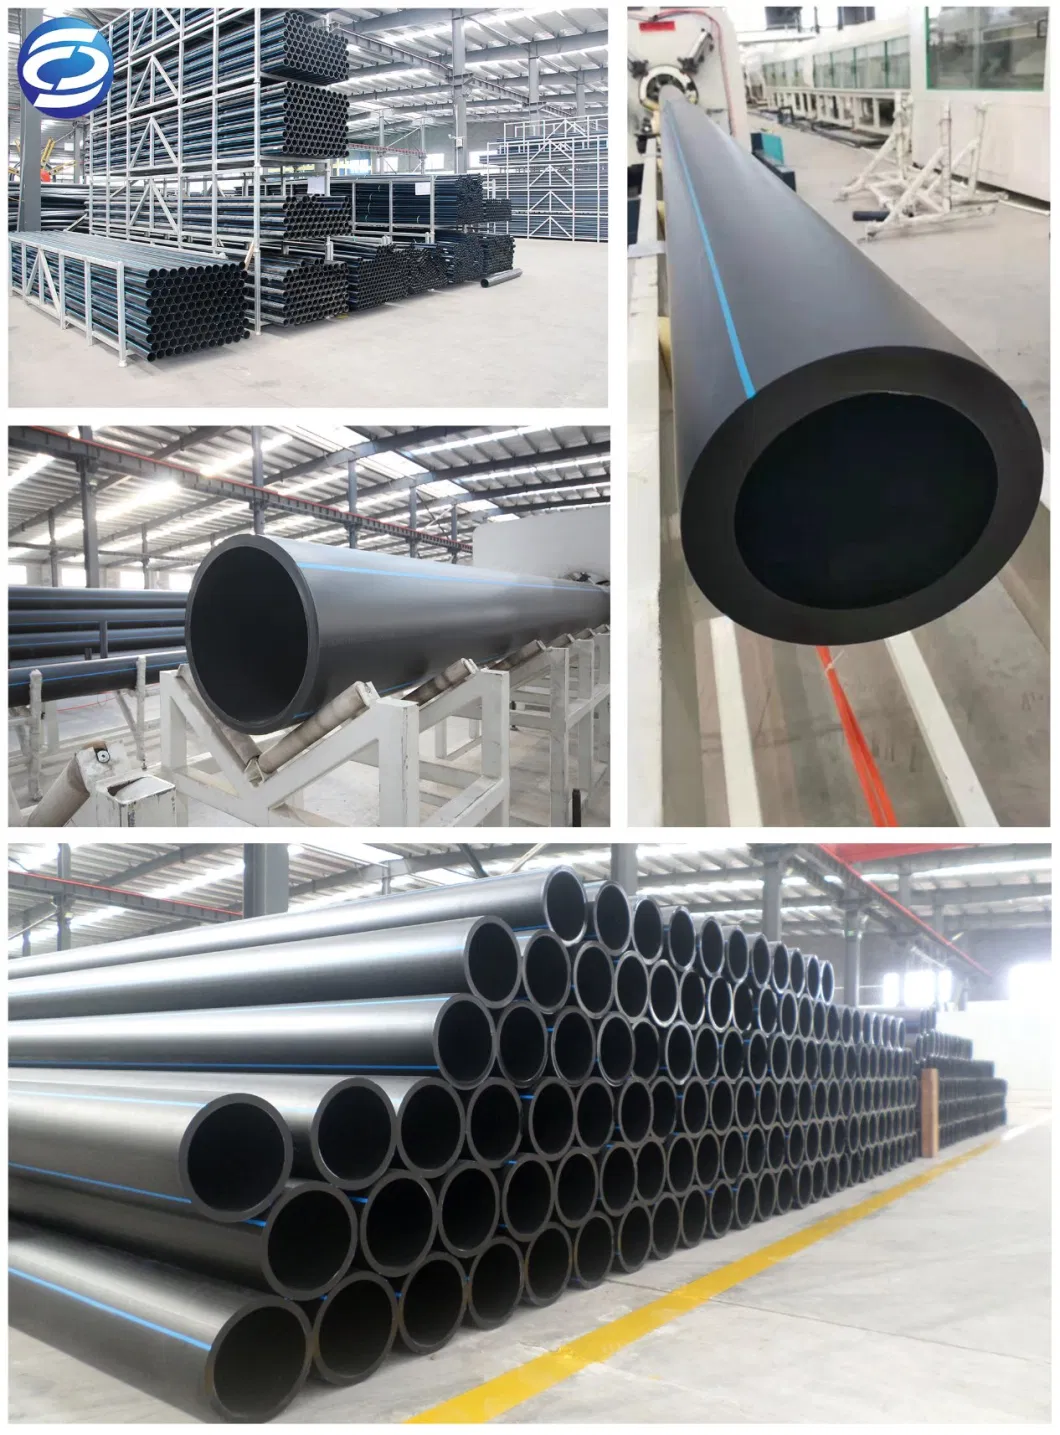 Black Plastic PE PVC UPVC MPVC HDPE Pipe for Building/Wire/Cable/Drainage/Fishing/Sprinkler/Agriculture Irrigation/Greenhouse